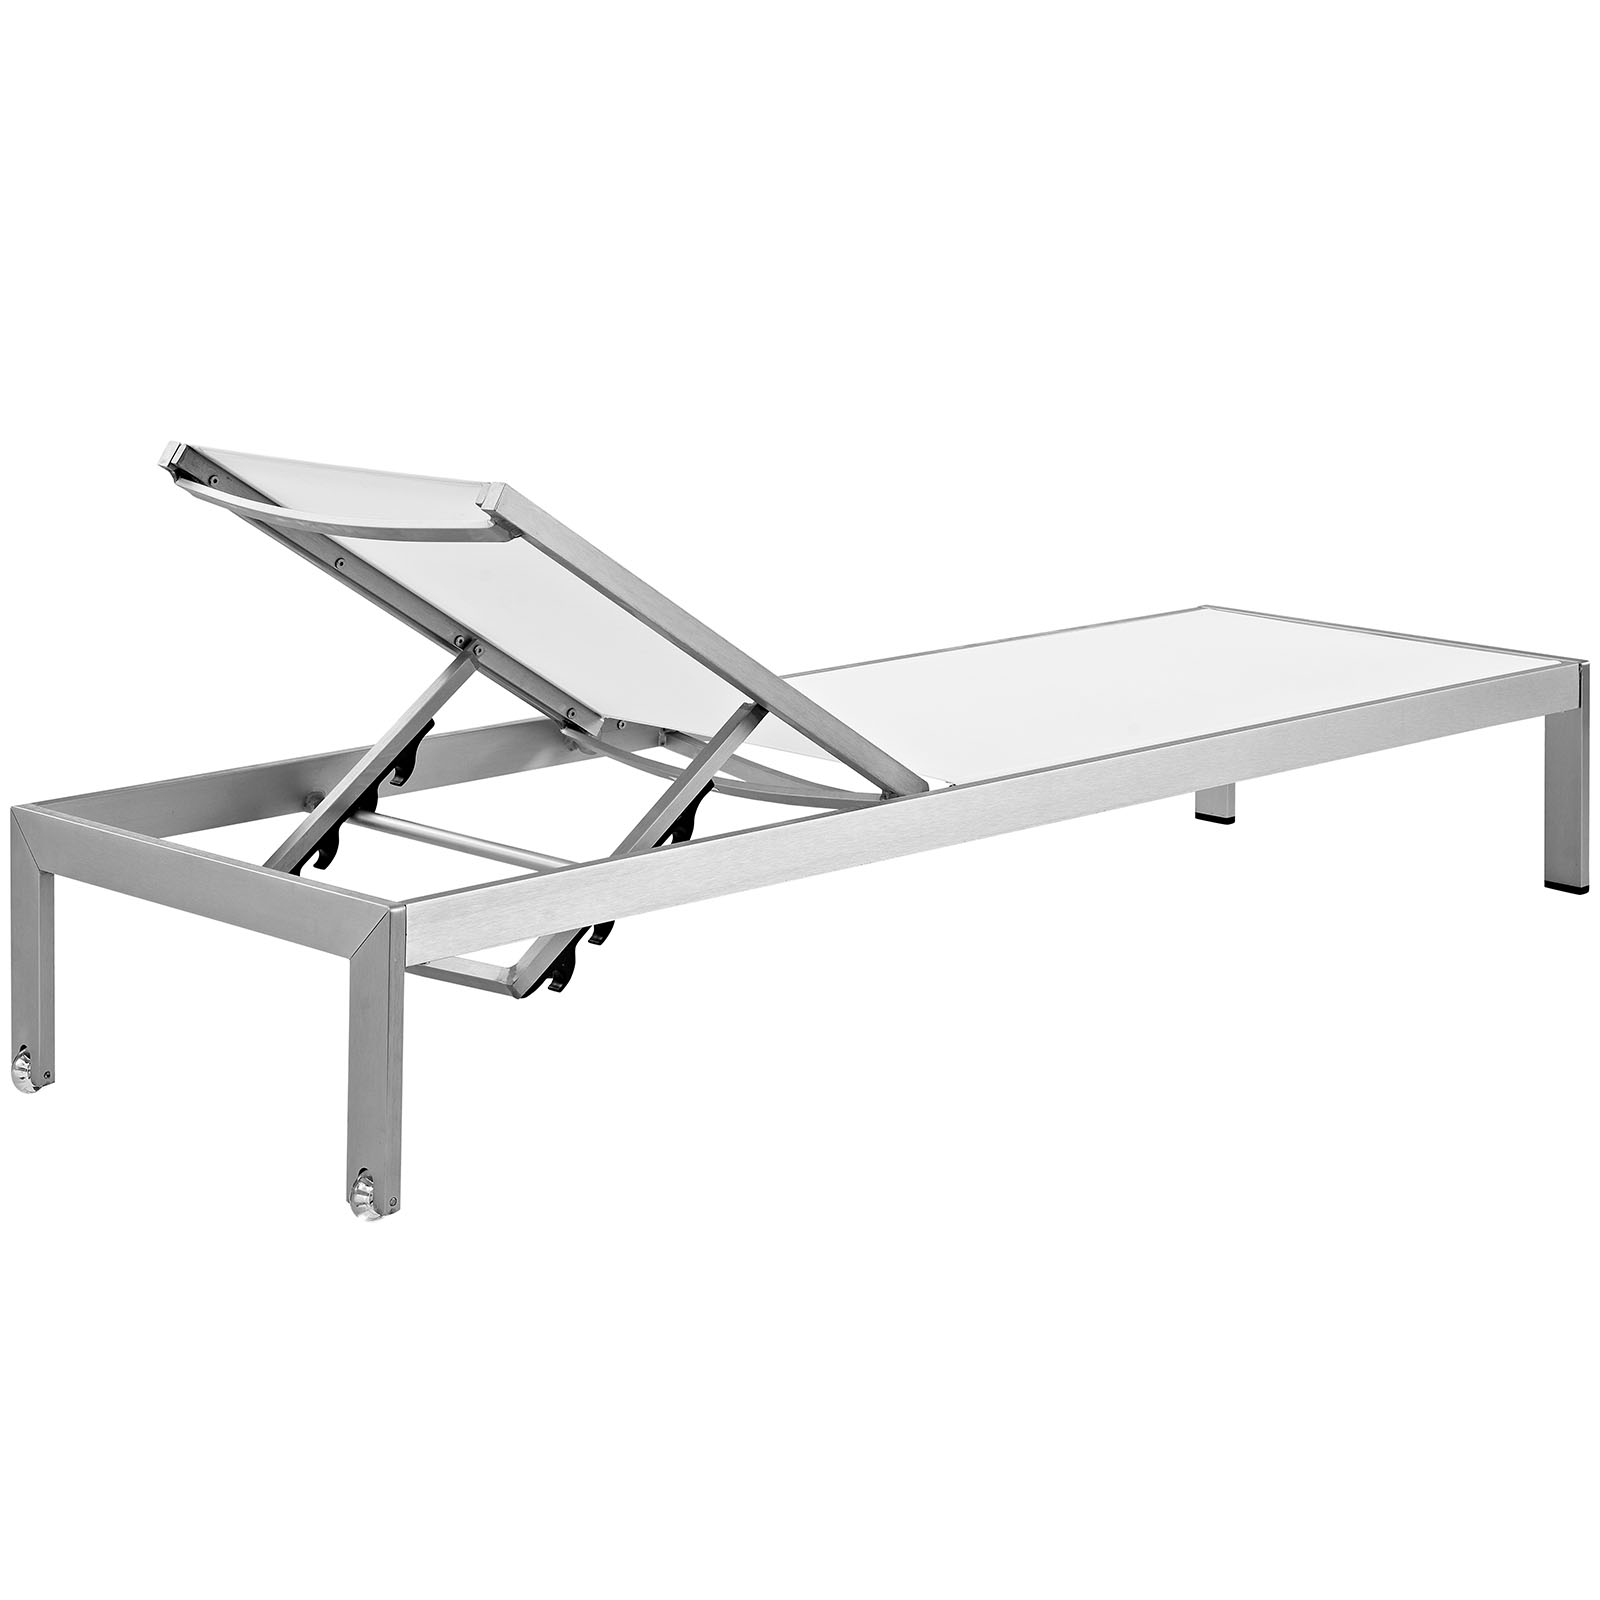 Modern Contemporary Urban Design Outdoor Patio Balcony Chaise Lounge Chair and Side Table set, White, Aluminum - image 5 of 7